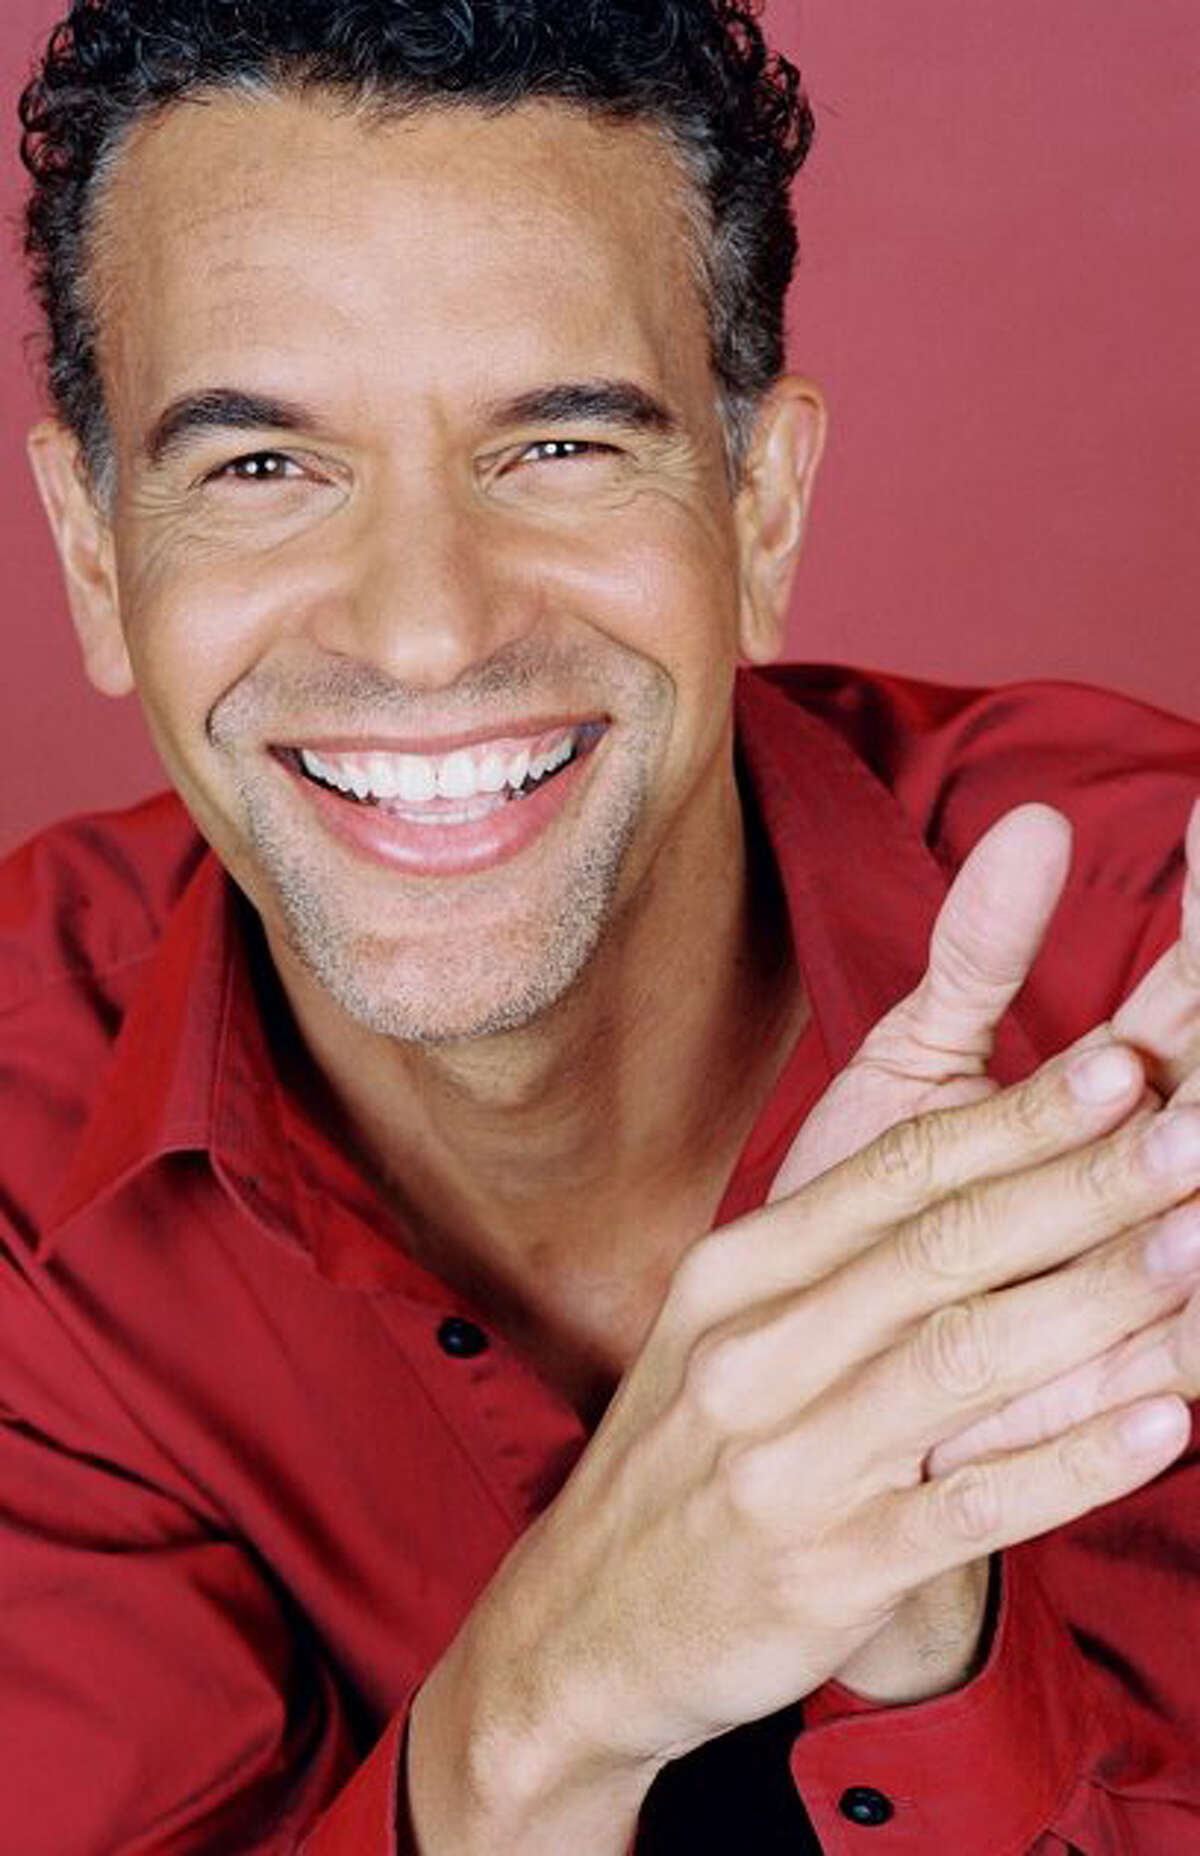 Tony Award-winner Brian Stokes Mitchell headlines a benefit for the Bridgeport-based Neighborhood Studios of Fairfield County on Saturday, March 17, at the Westport County Playhouse.